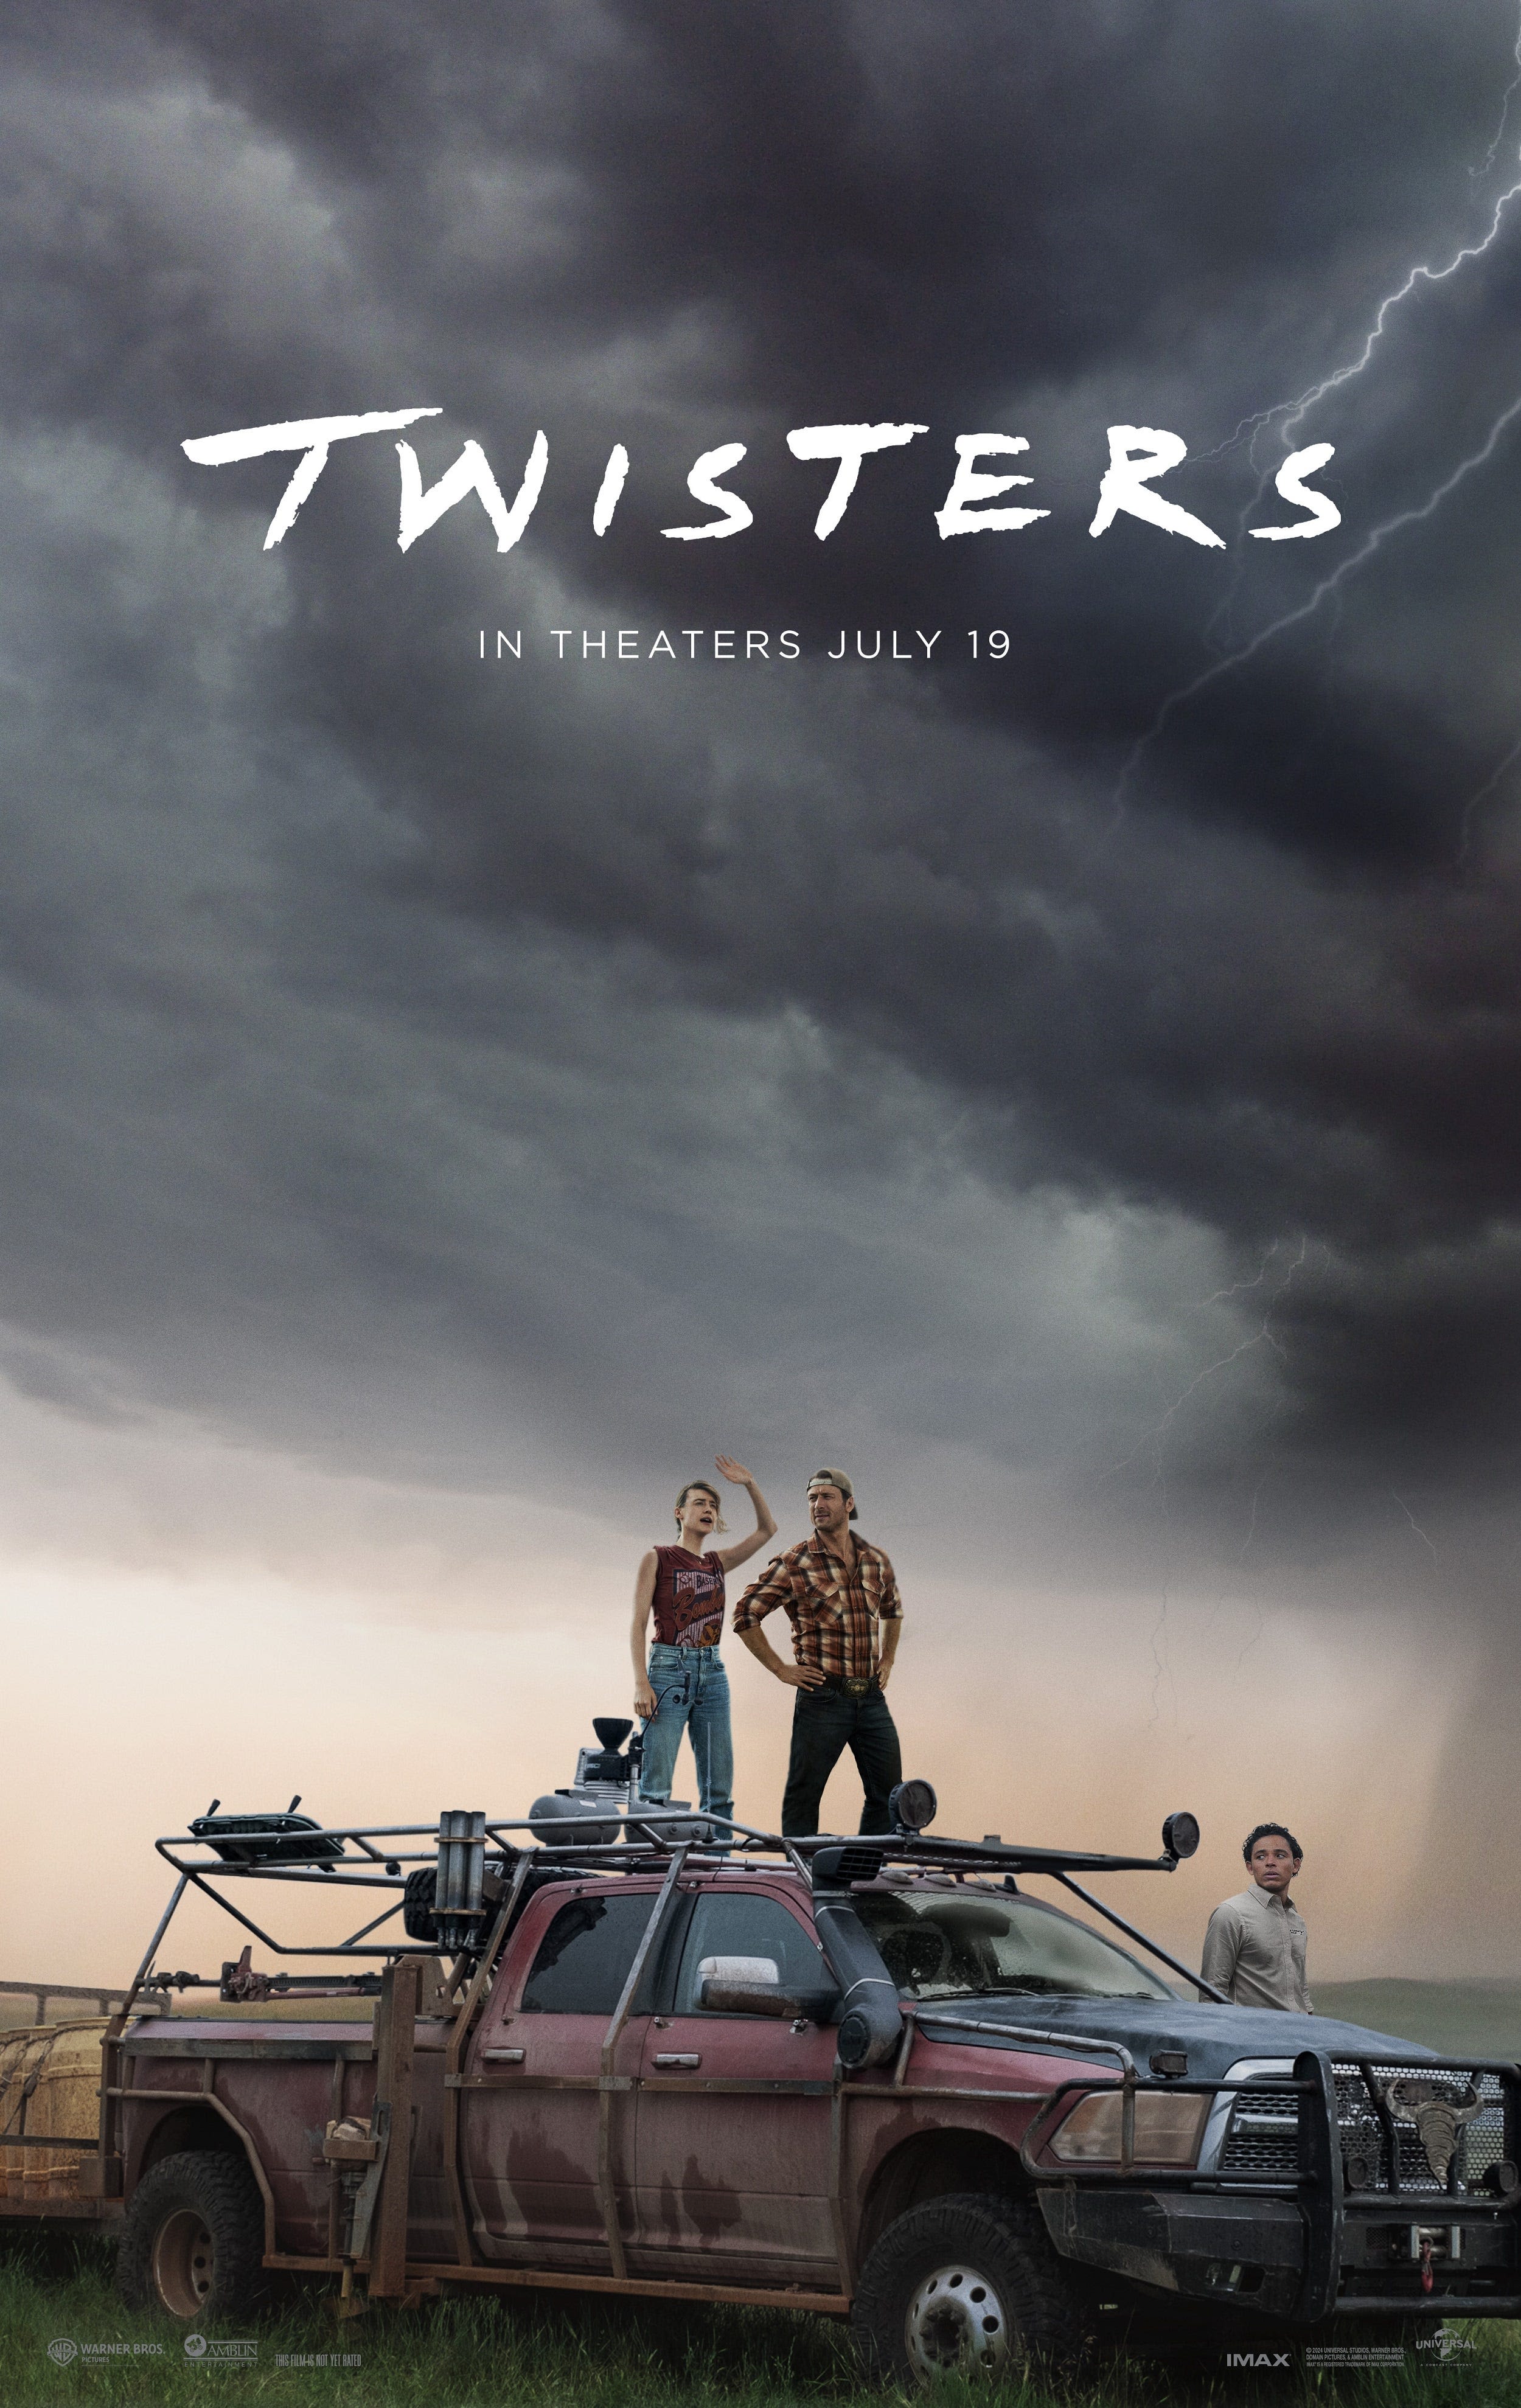 Here's which Oklahoma movie theaters are showing 'Twisters' in 4DX